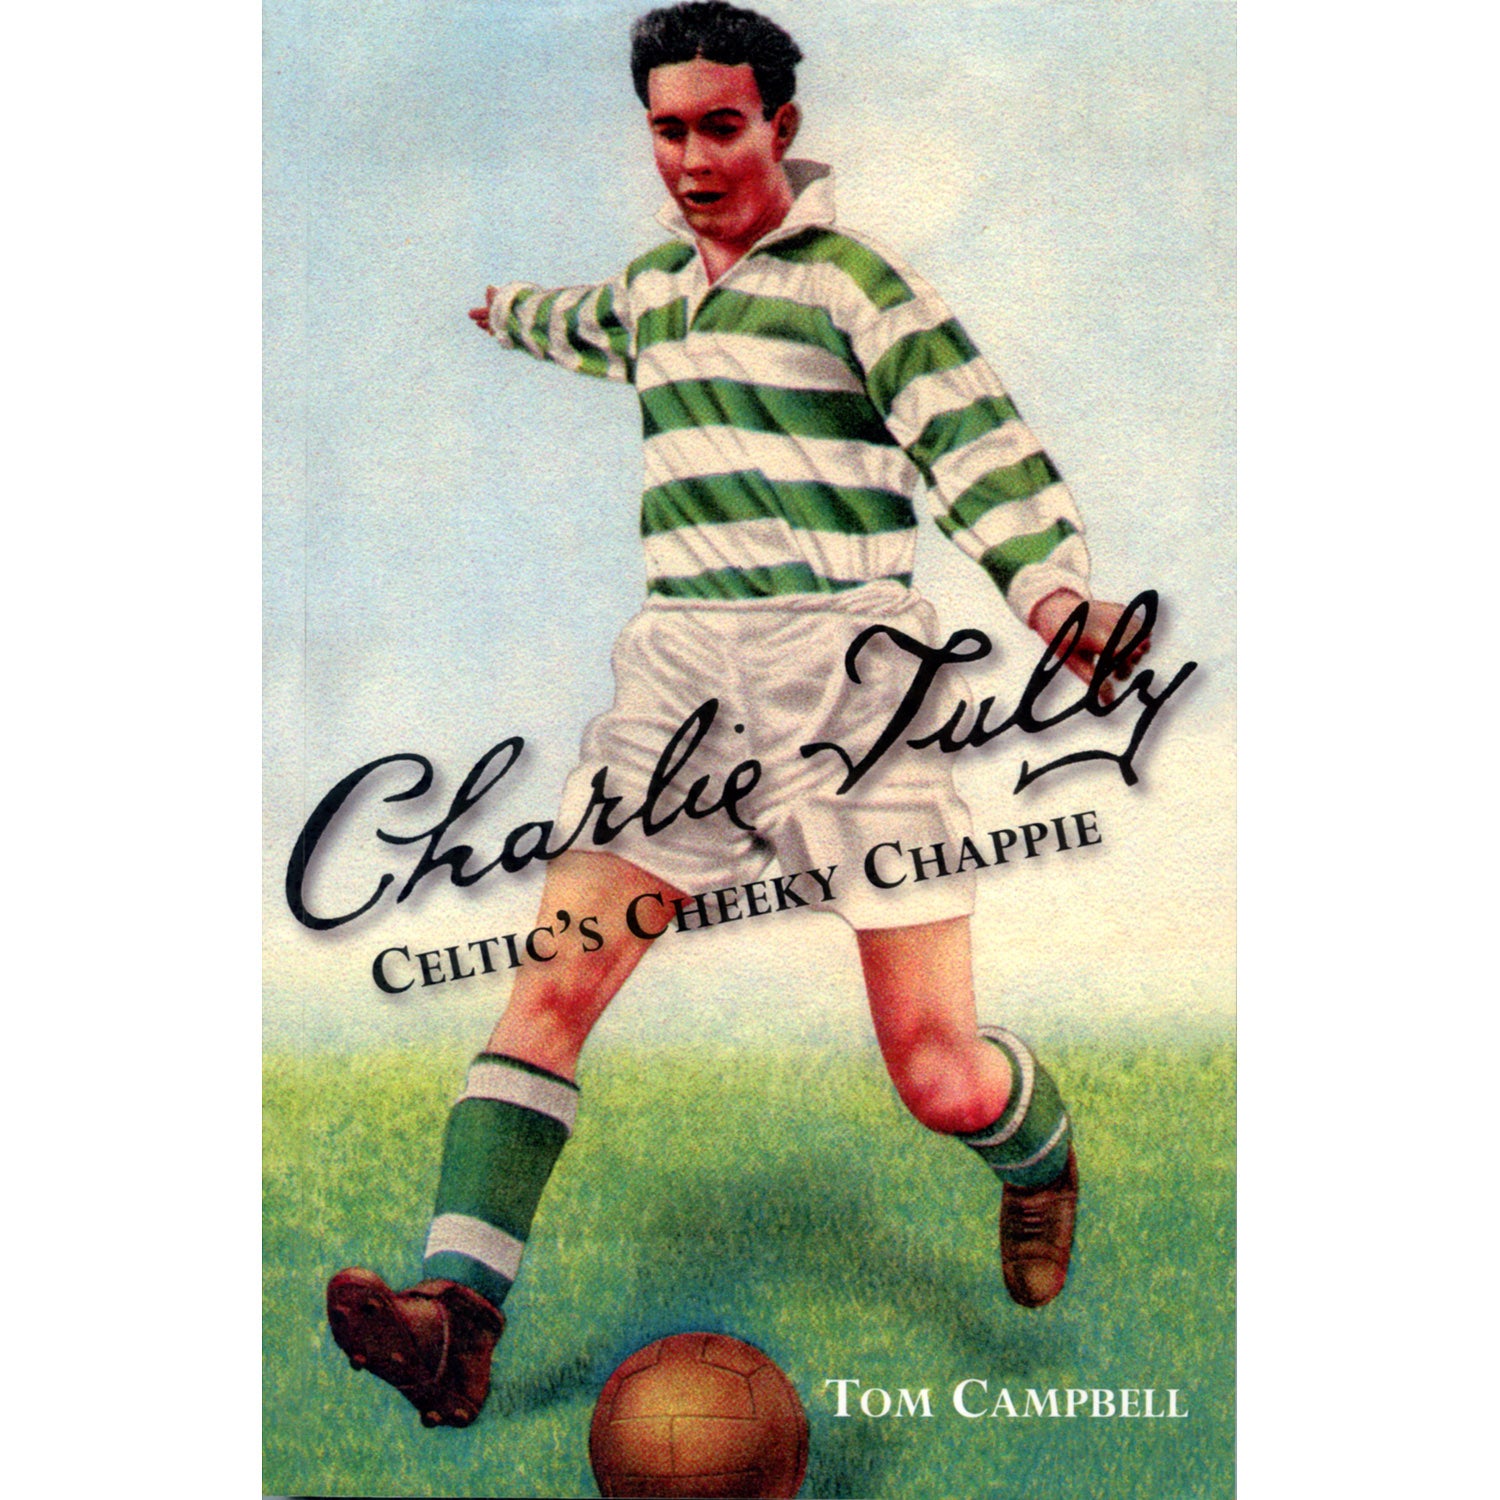 Charlie Tully – Celtic's Cheeky Chappie